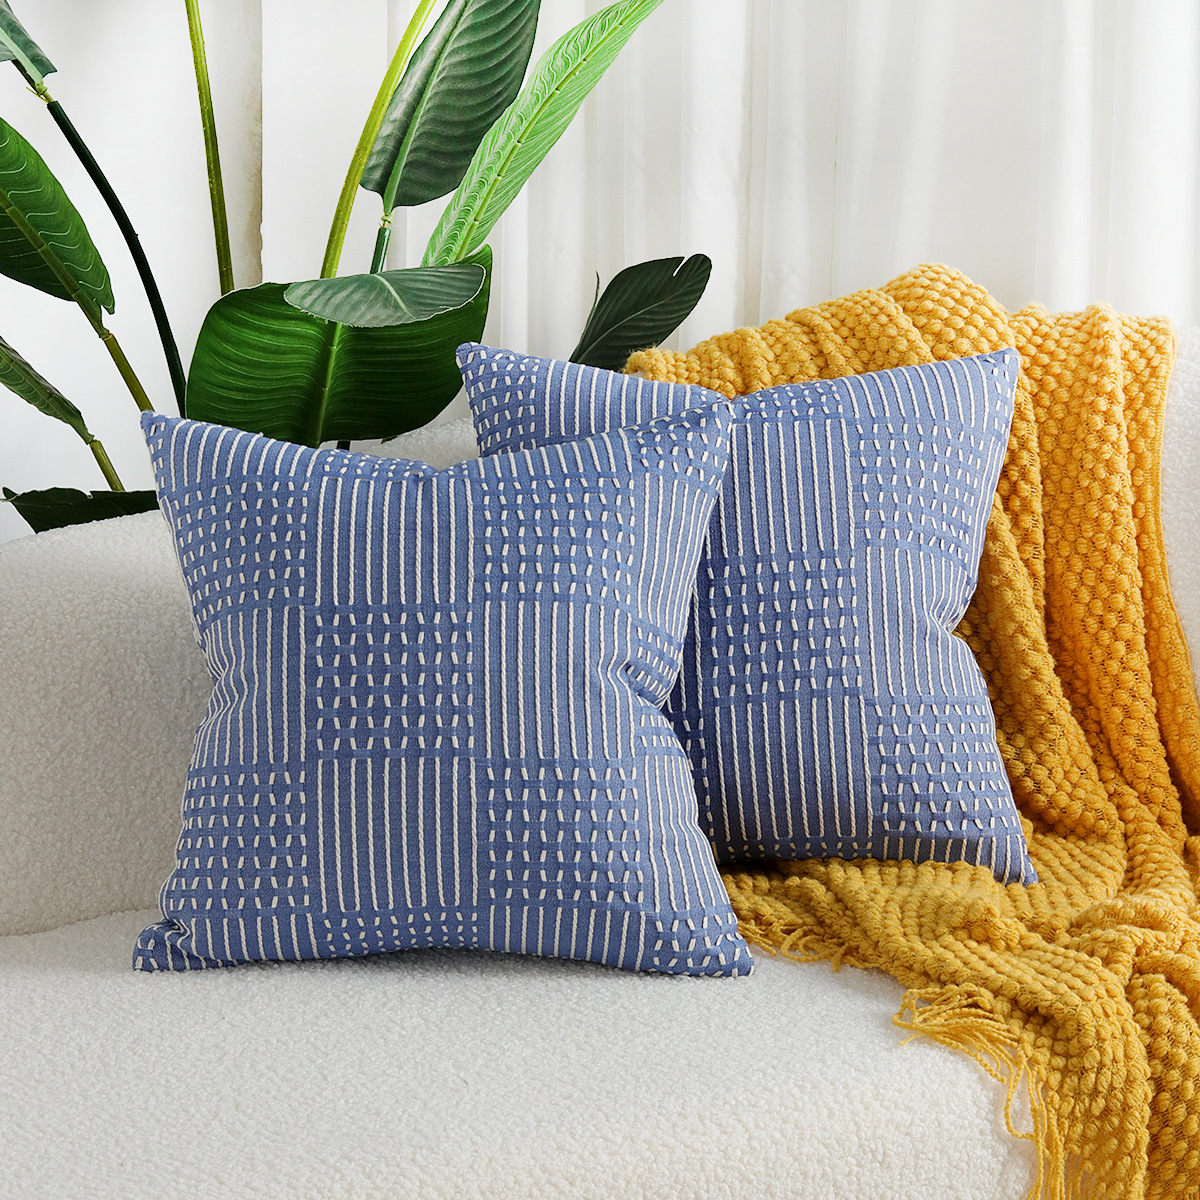 New Simple Modern Style Geometric Pattern Cotton Woven Jacquard Cushion Pillow Cover